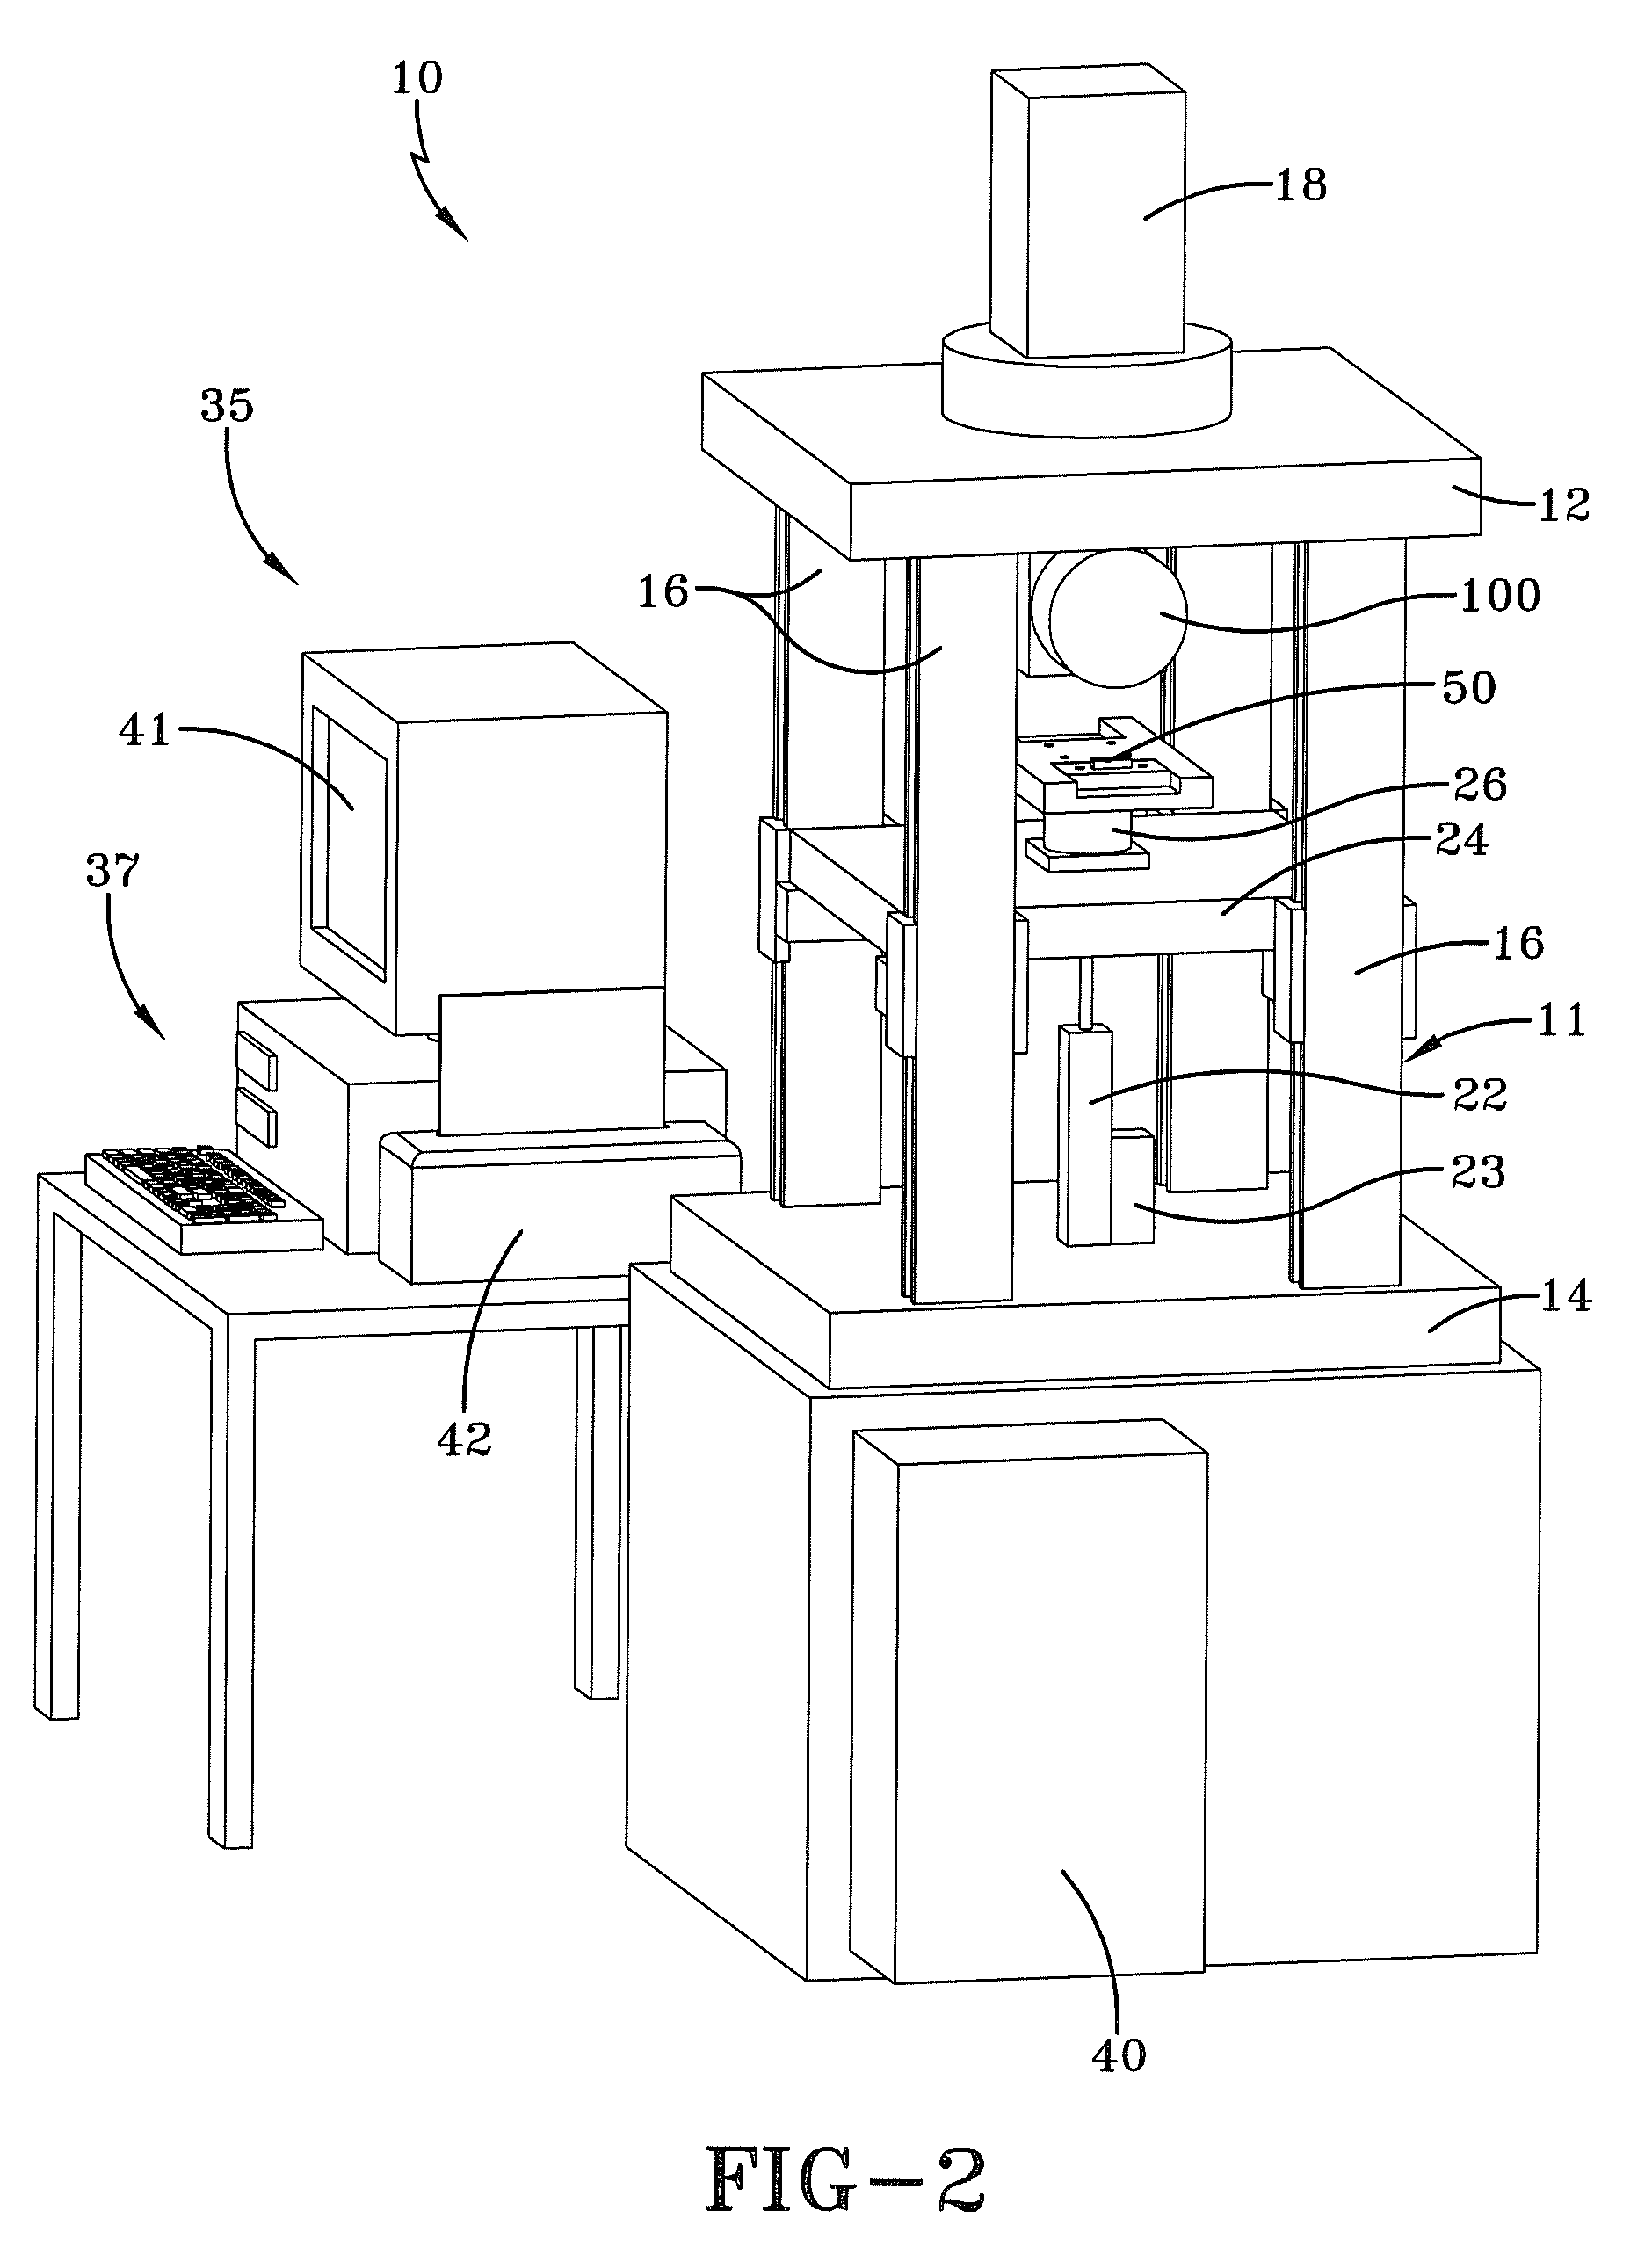 Method and apparatus for determining coefficient of friction